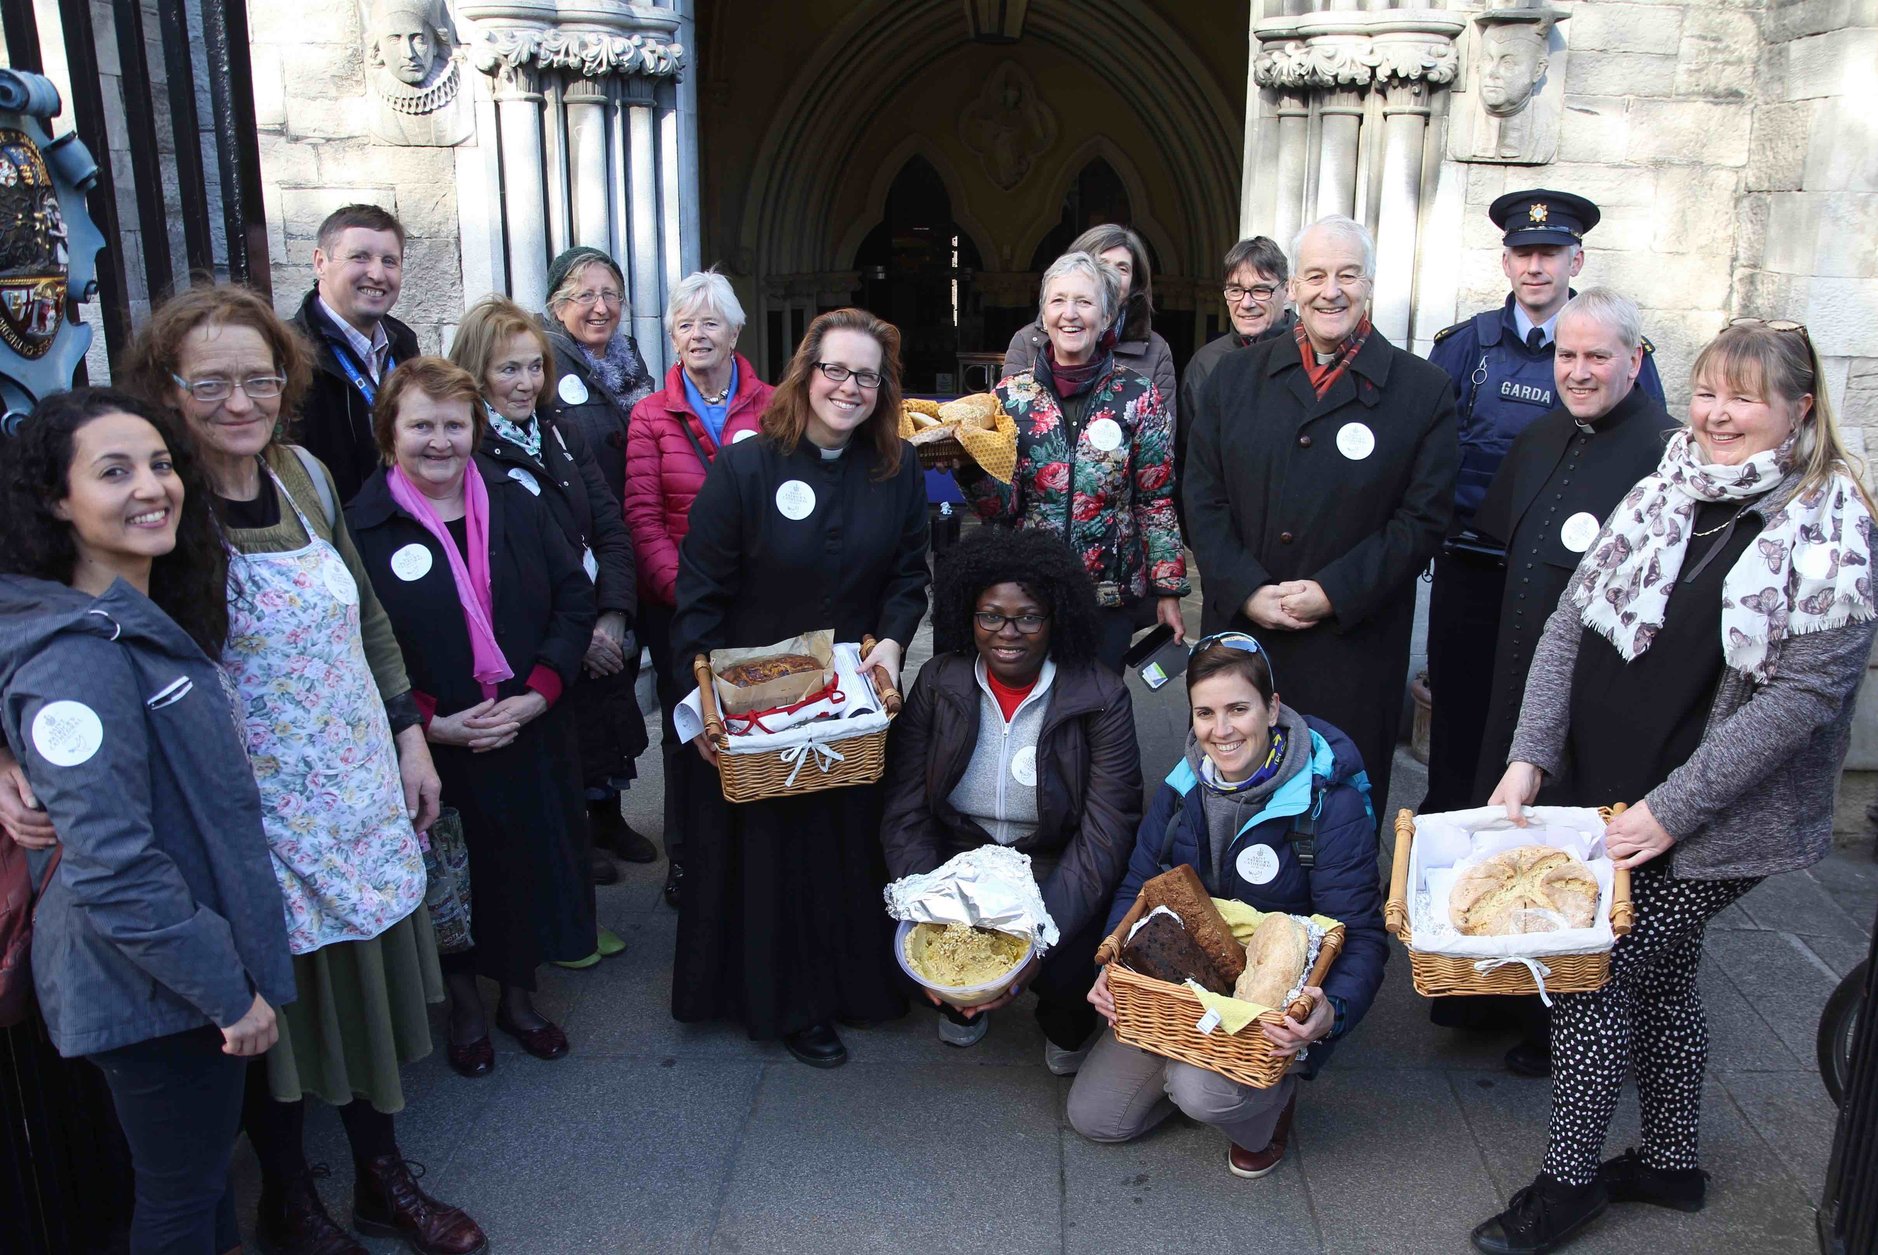 Bake Bread for Peace Event Helps Build Community